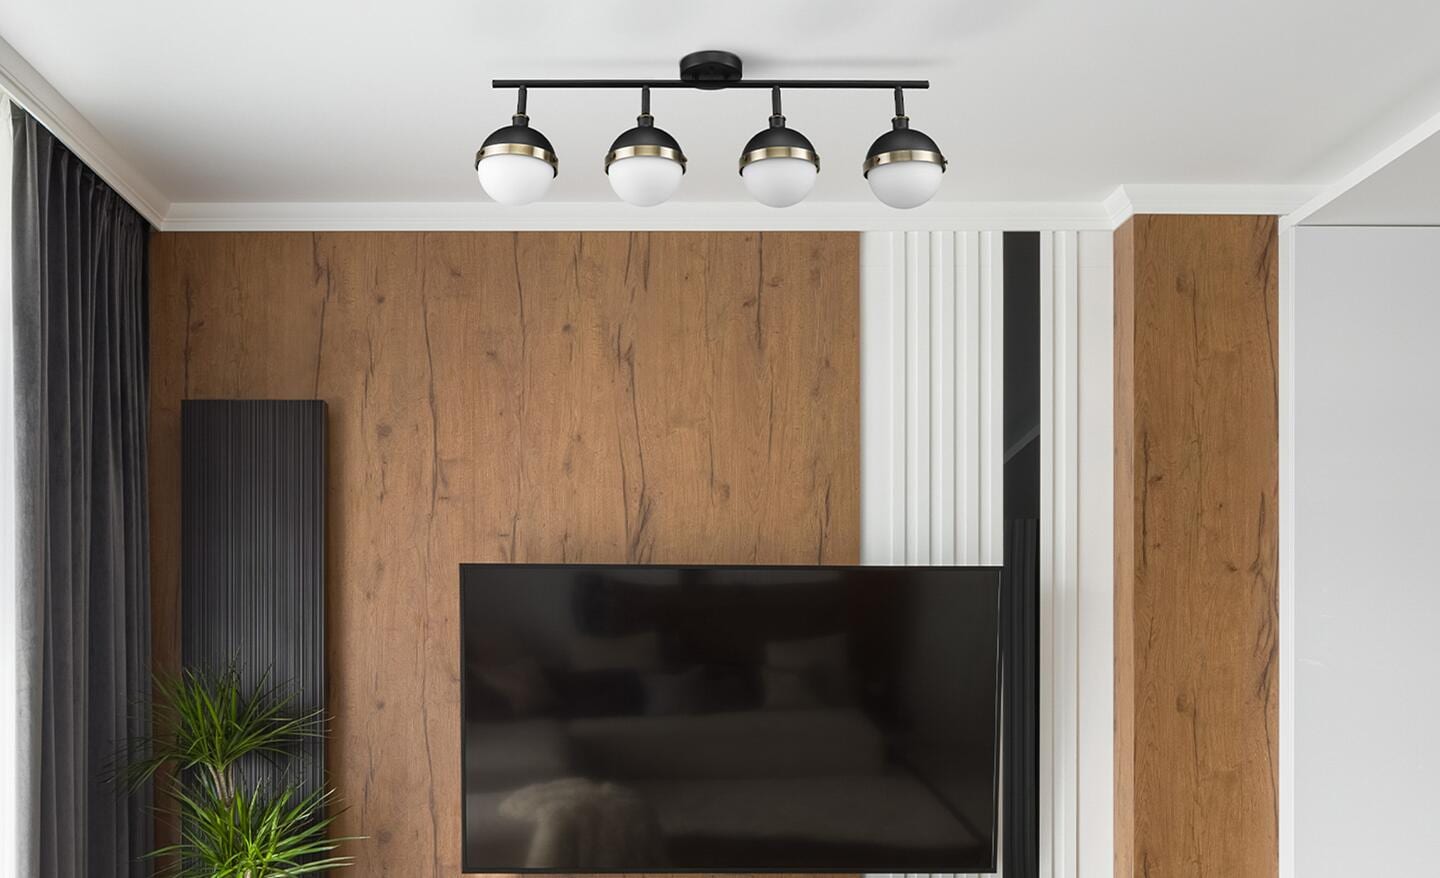 Four rounded track lights hang from a track on the ceiling of a wood-paneled room.